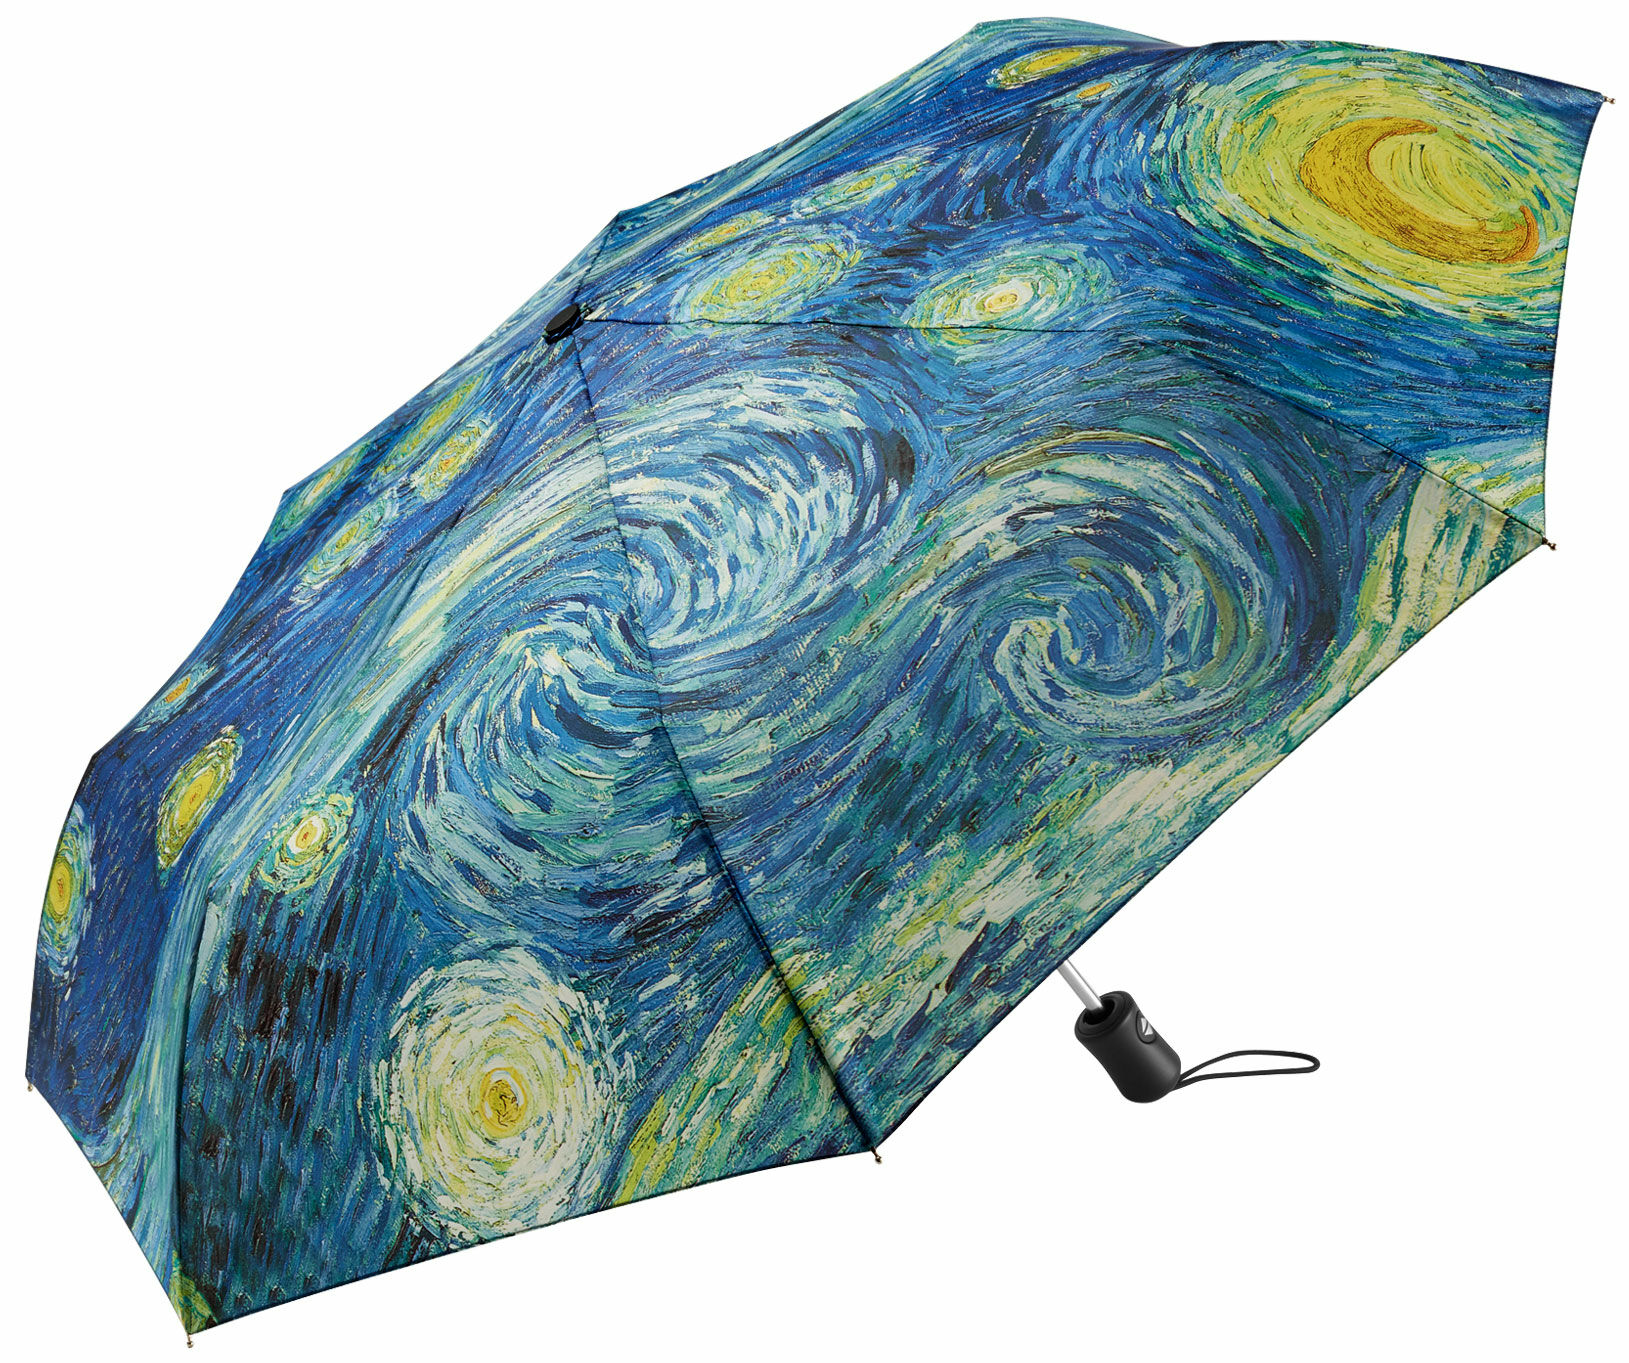 Telescopic umbrella "Starry Night" - MoMA Collection by Vincent van Gogh